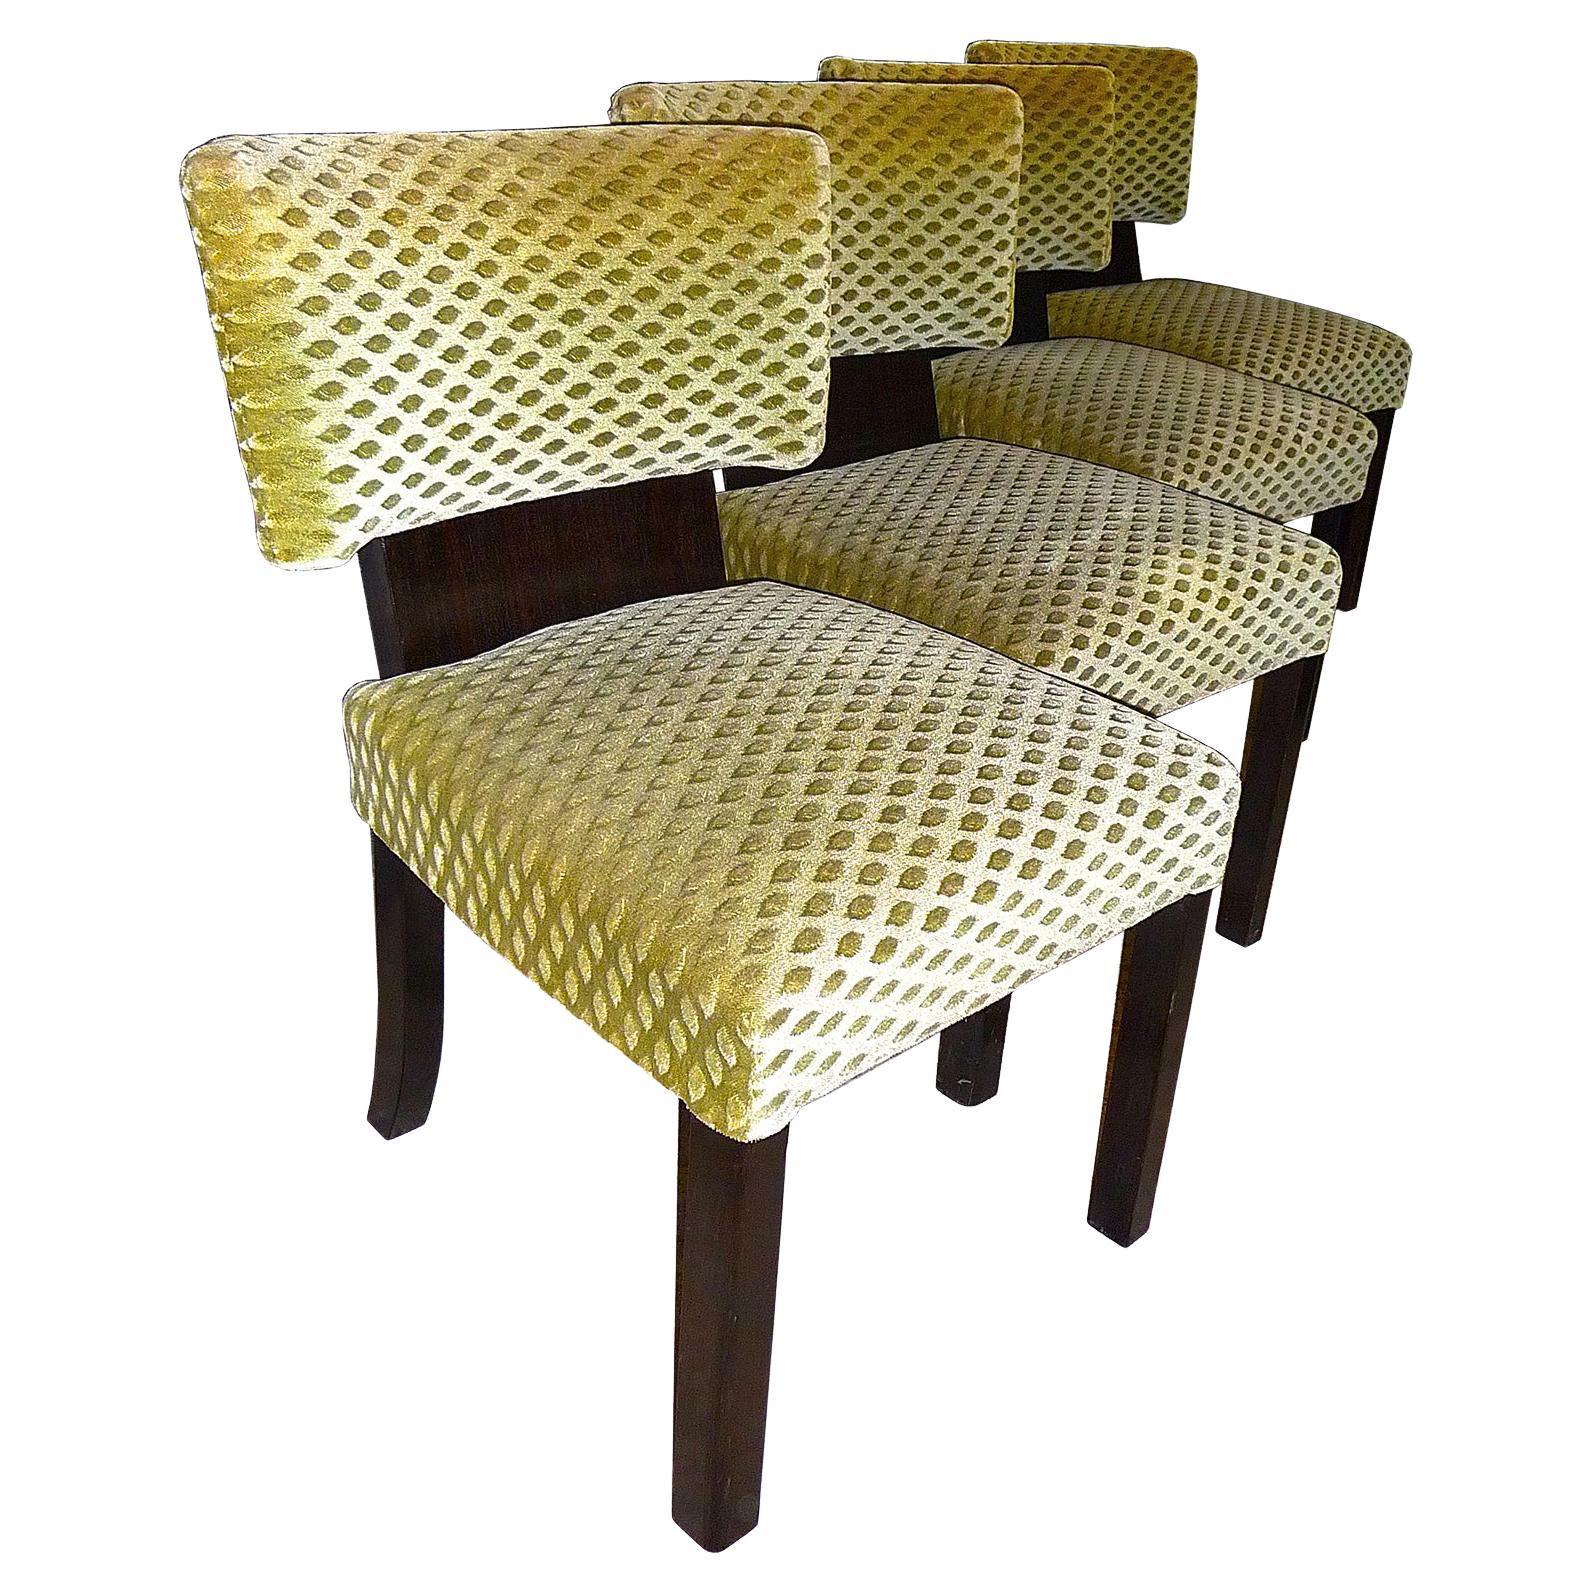 Art Deco Bauhaus Dining Chairs, Set of Four, Bruno Paul Design, Germany, 1930s